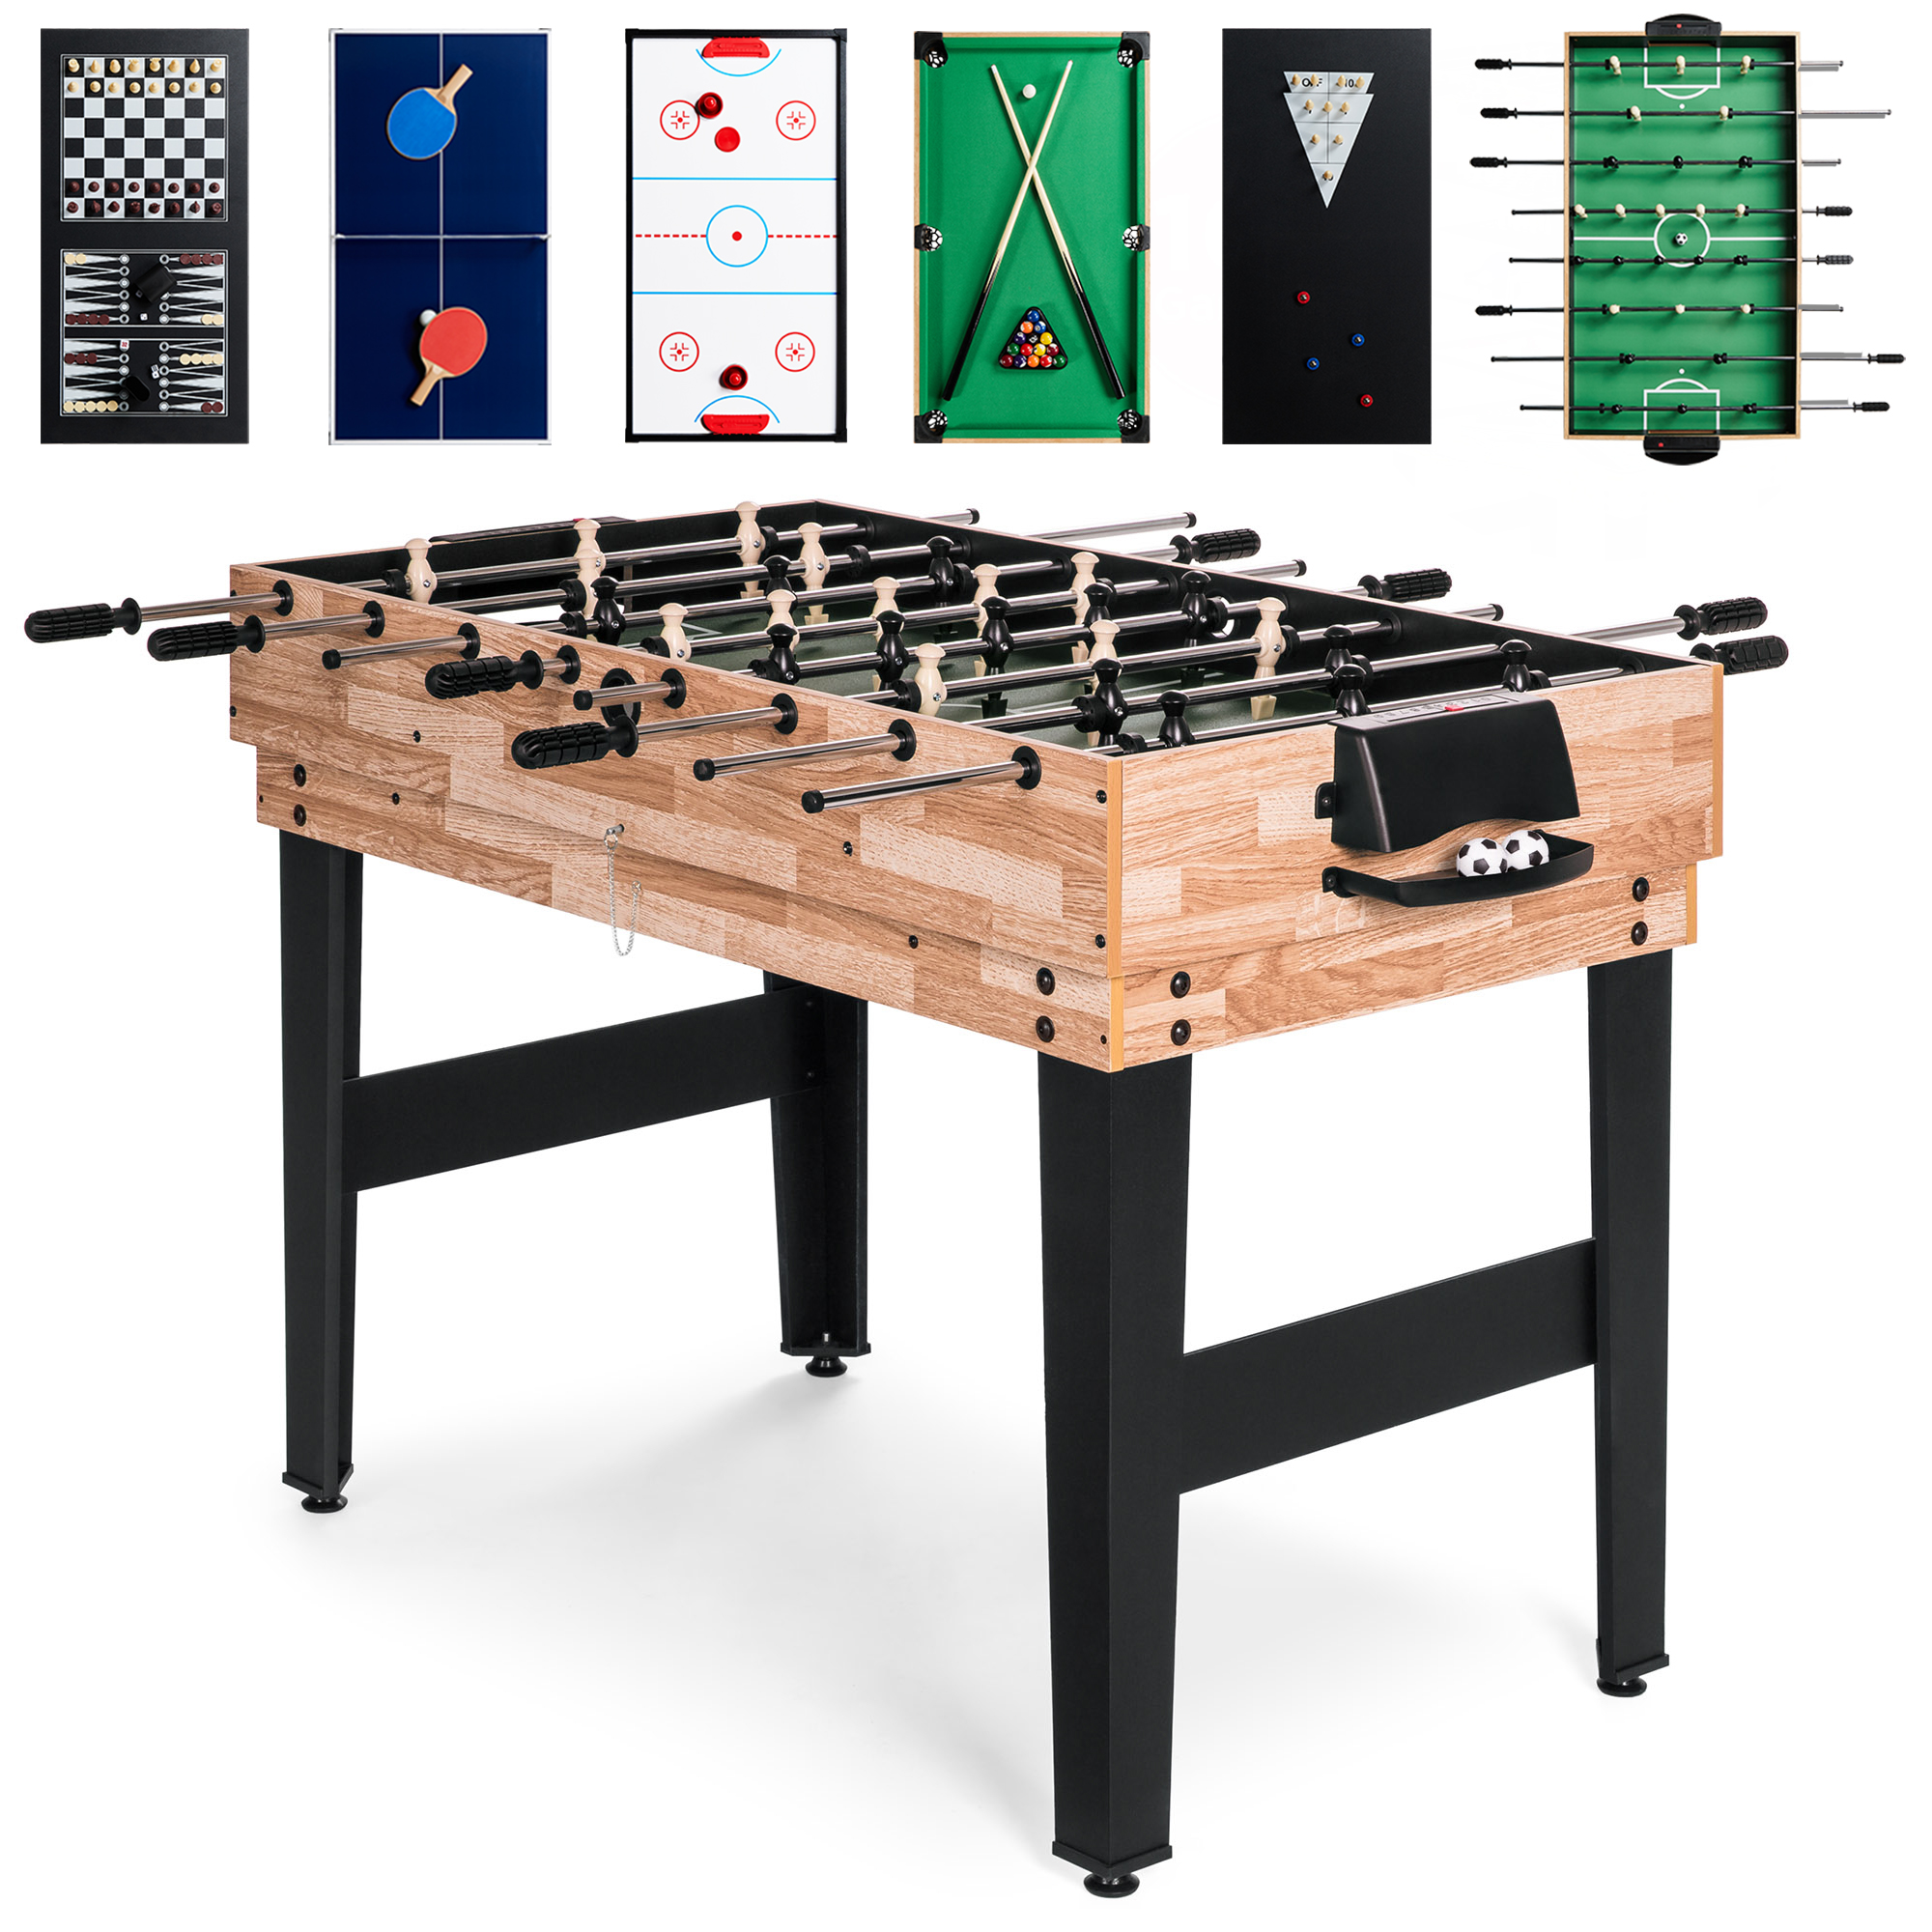 Best Choice Products 2x4ft 10-in-1 Combo Game Table Set w/ Hockey, Foosball, Pool, Shuffleboard, Ping Pong - Natural - image 1 of 8